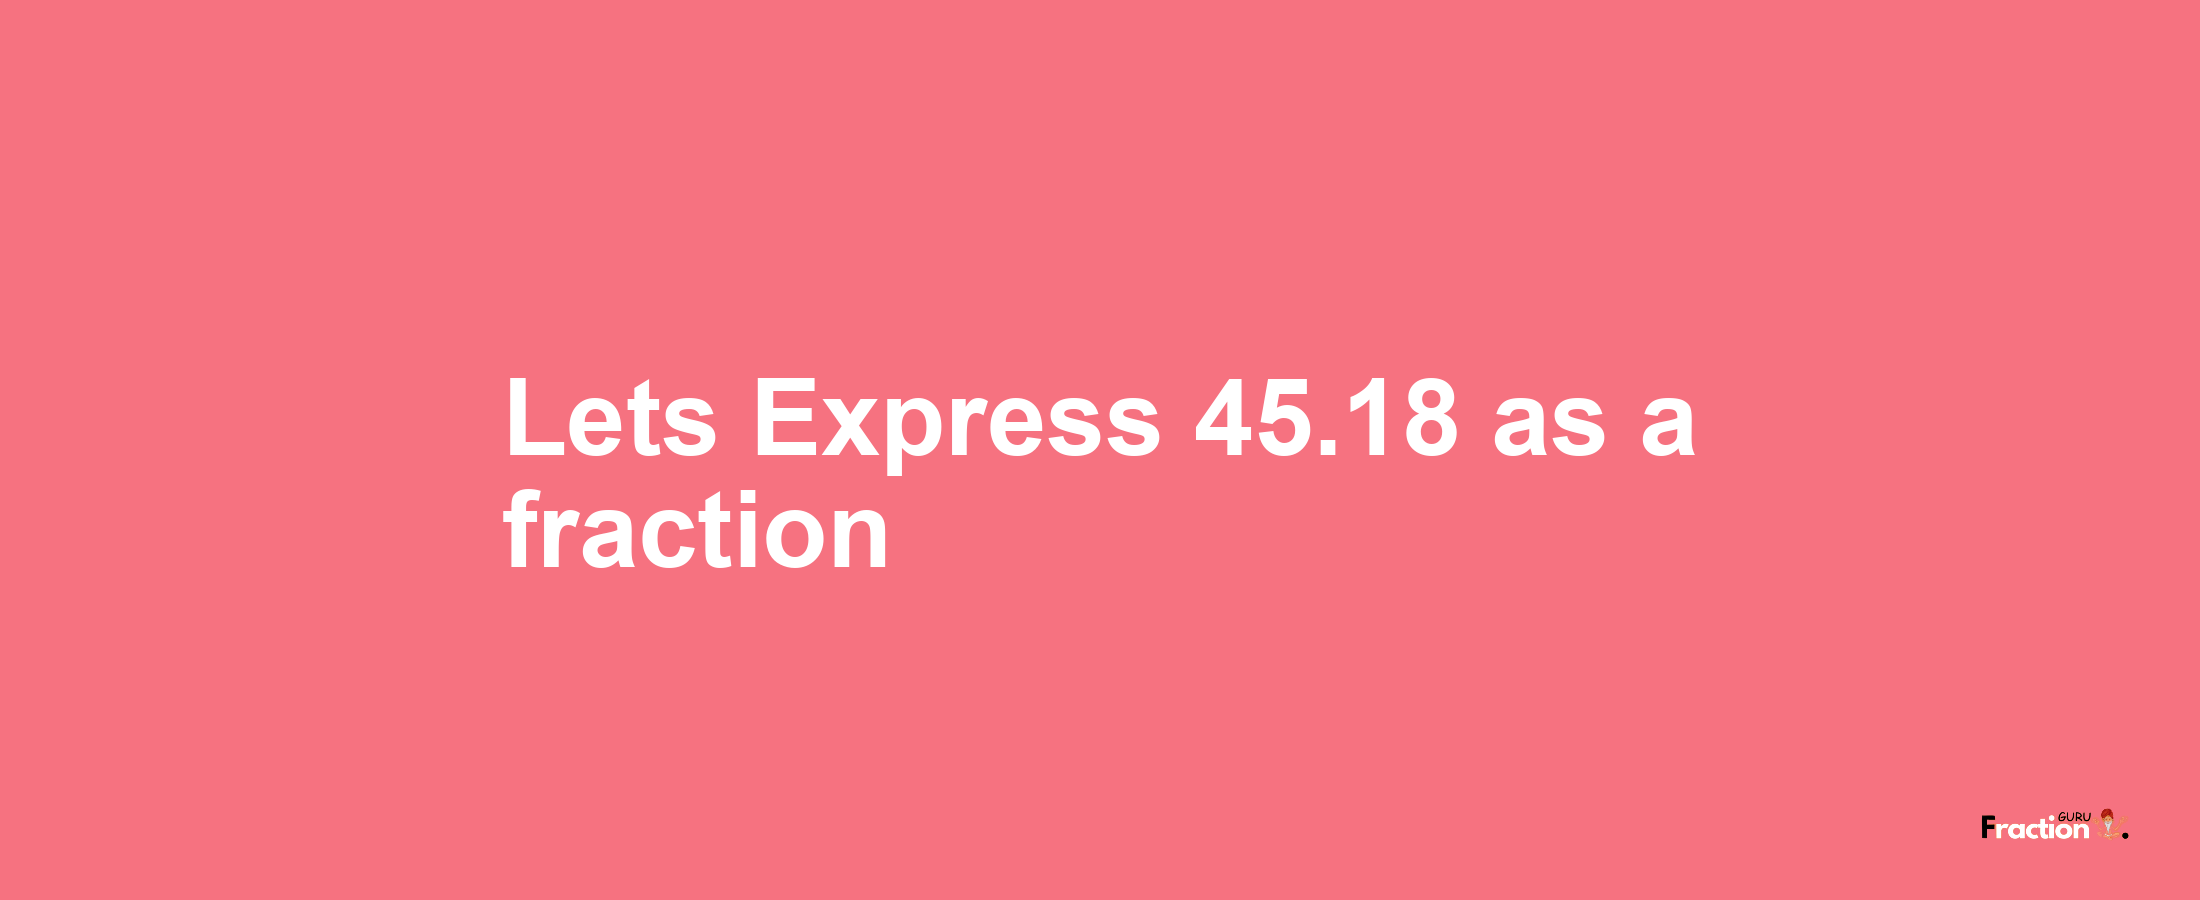 Lets Express 45.18 as afraction